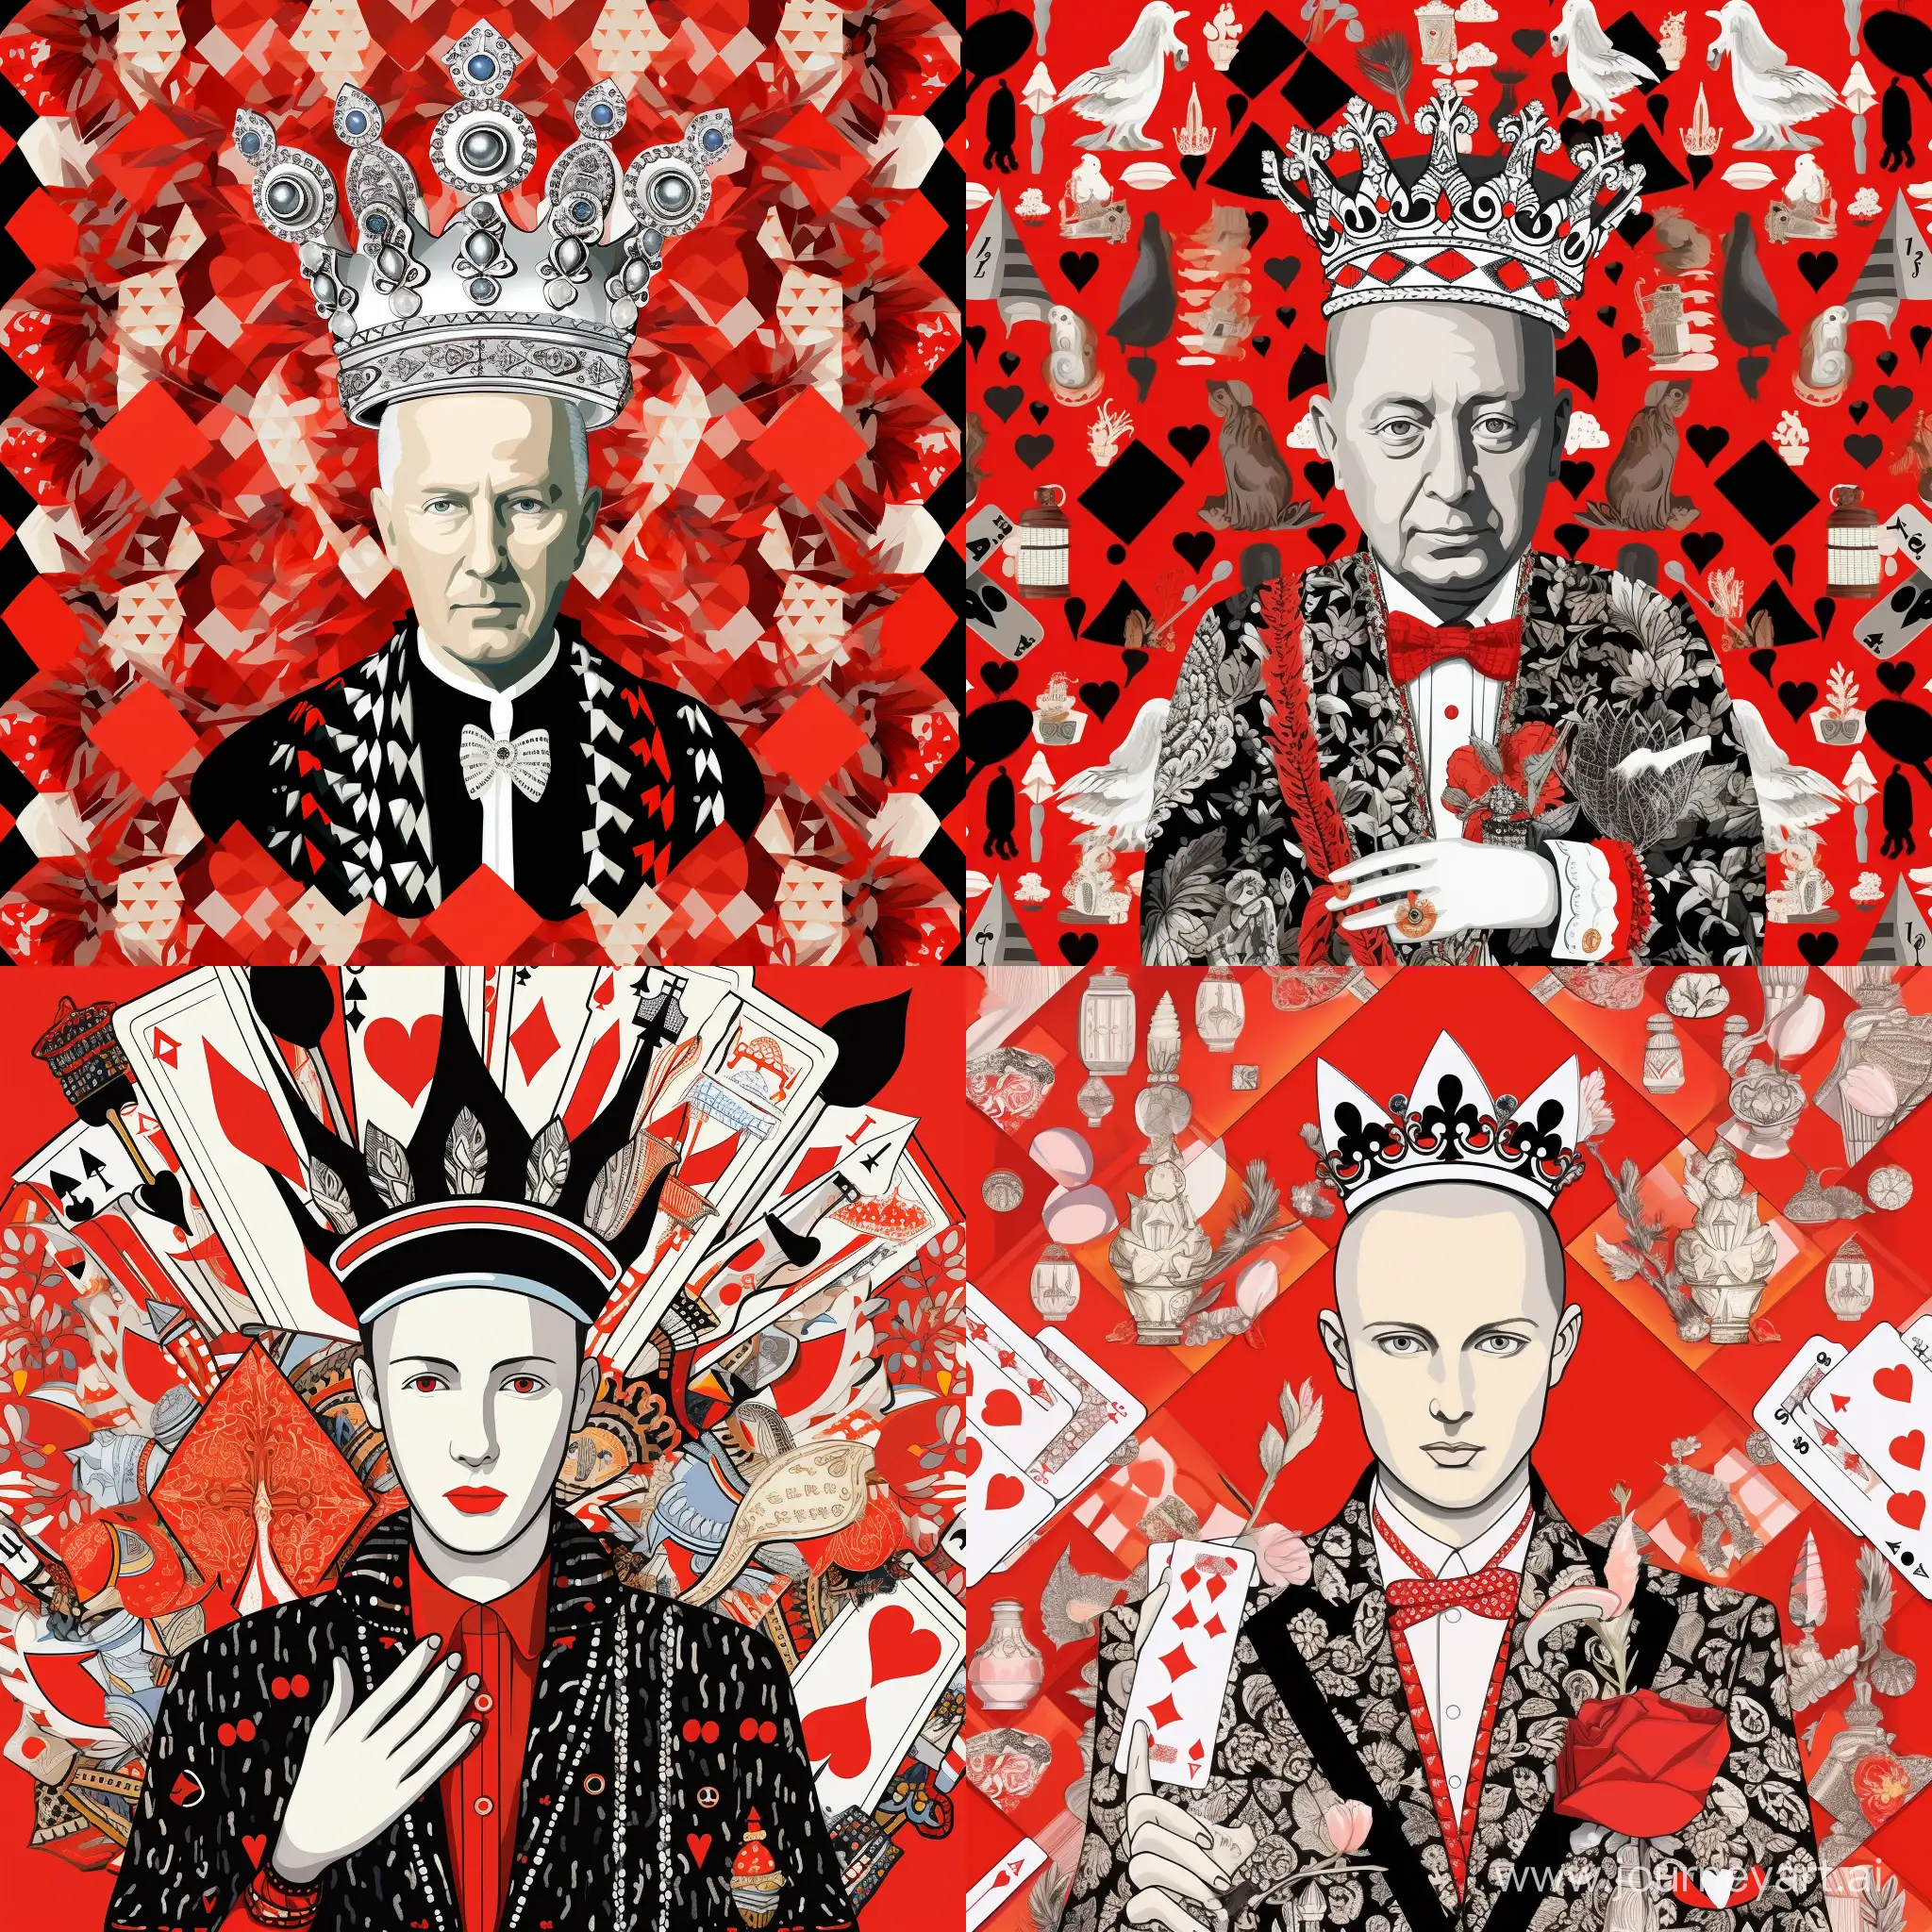 Portrait of Christian Dior with a crown on his head, many details, complex, on the background of a pattern of clubs, accessories from Dior, colors black, white, red, gray, cartoon, cartoon style, pop art style, fashion illustration style